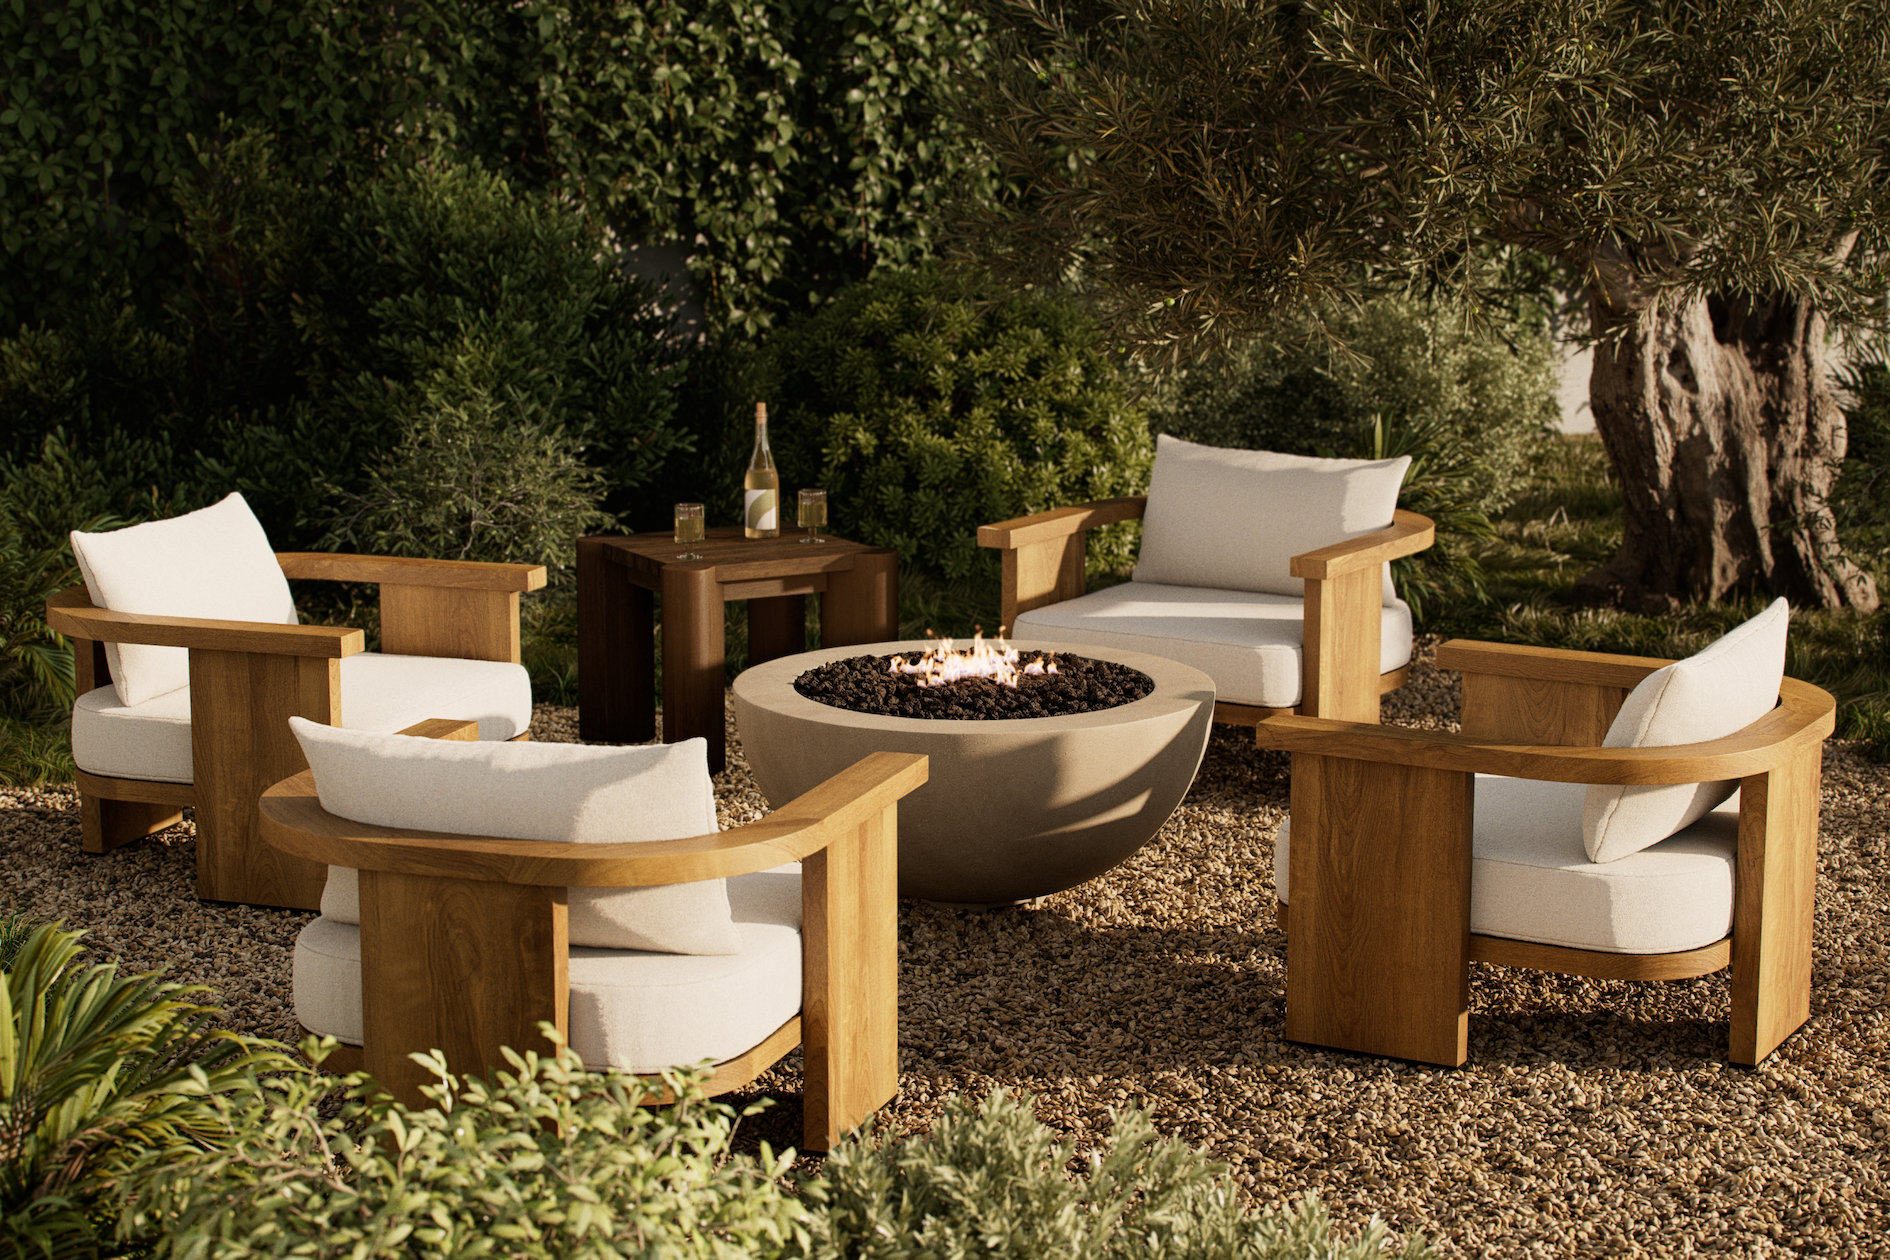 a group of chairs and a fire pit in a garden